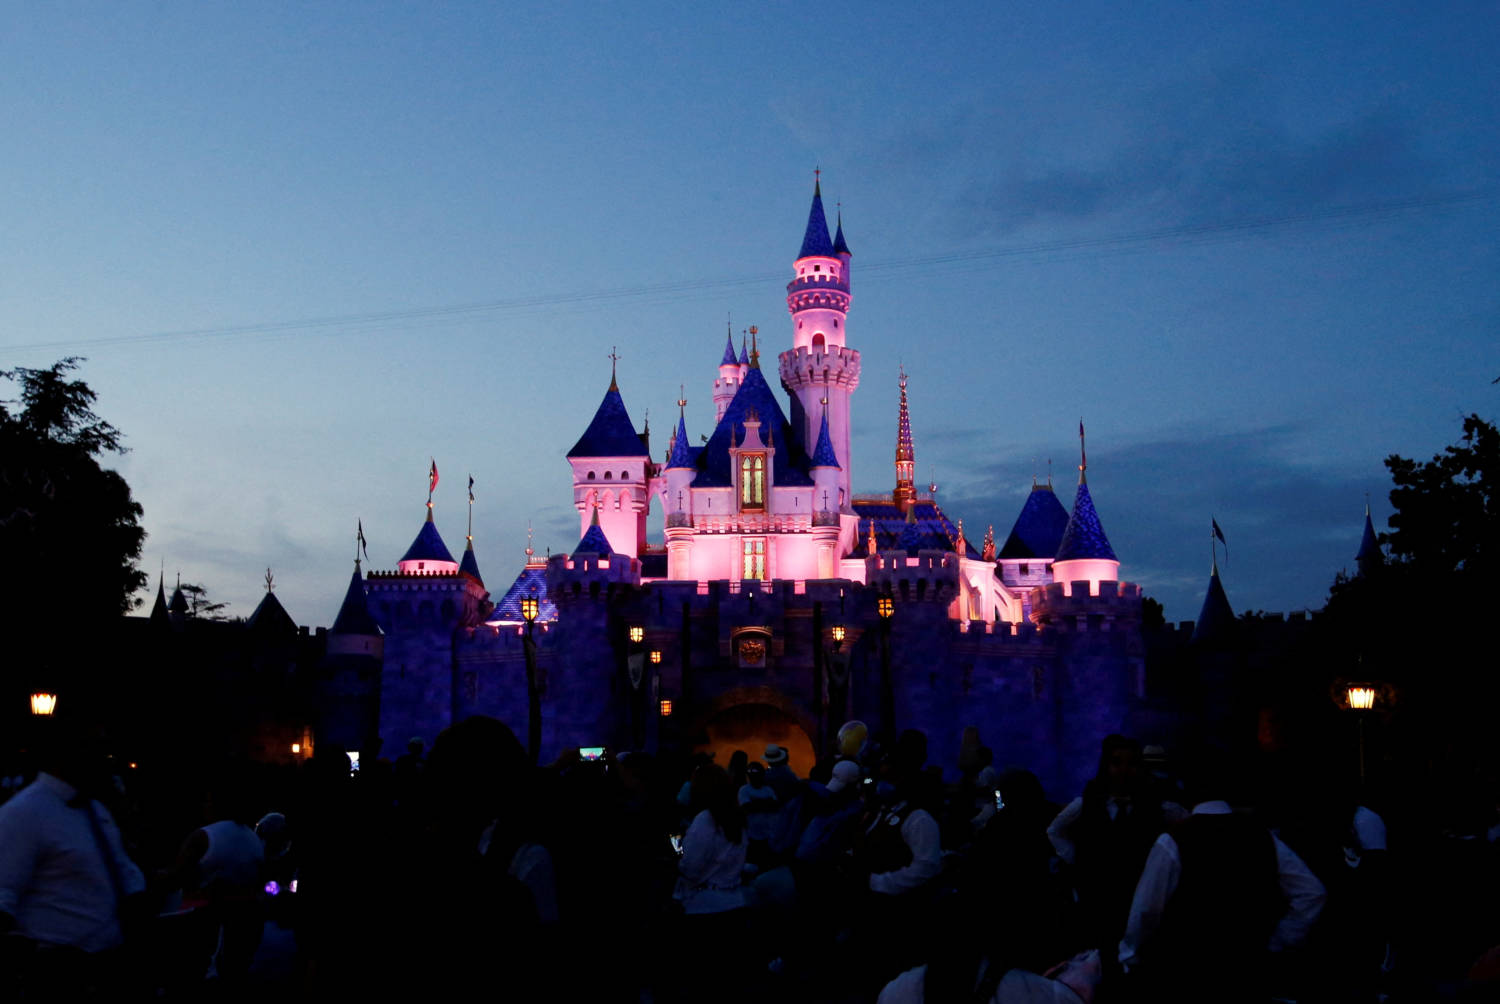 File Photo: Sleeping Beauty Castle Is Pictured At Dusk At Disneyland Park In Anaheim